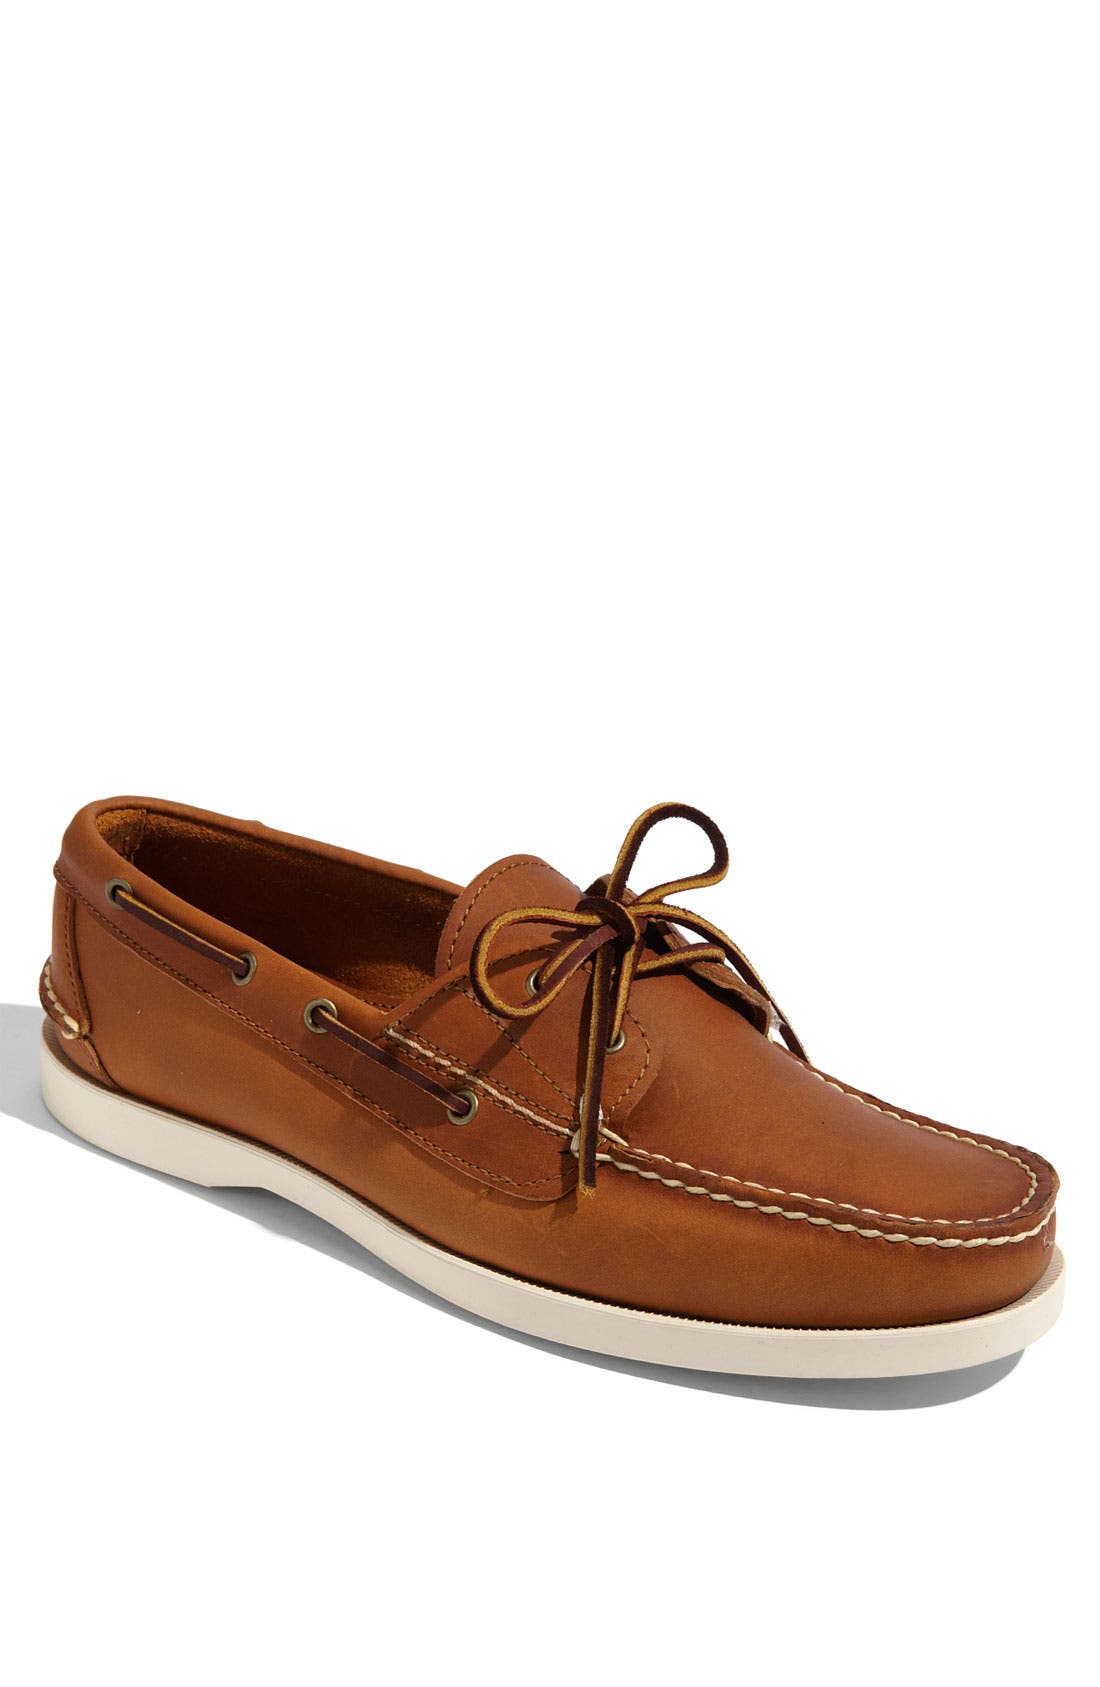 red wing shoes boat shoes